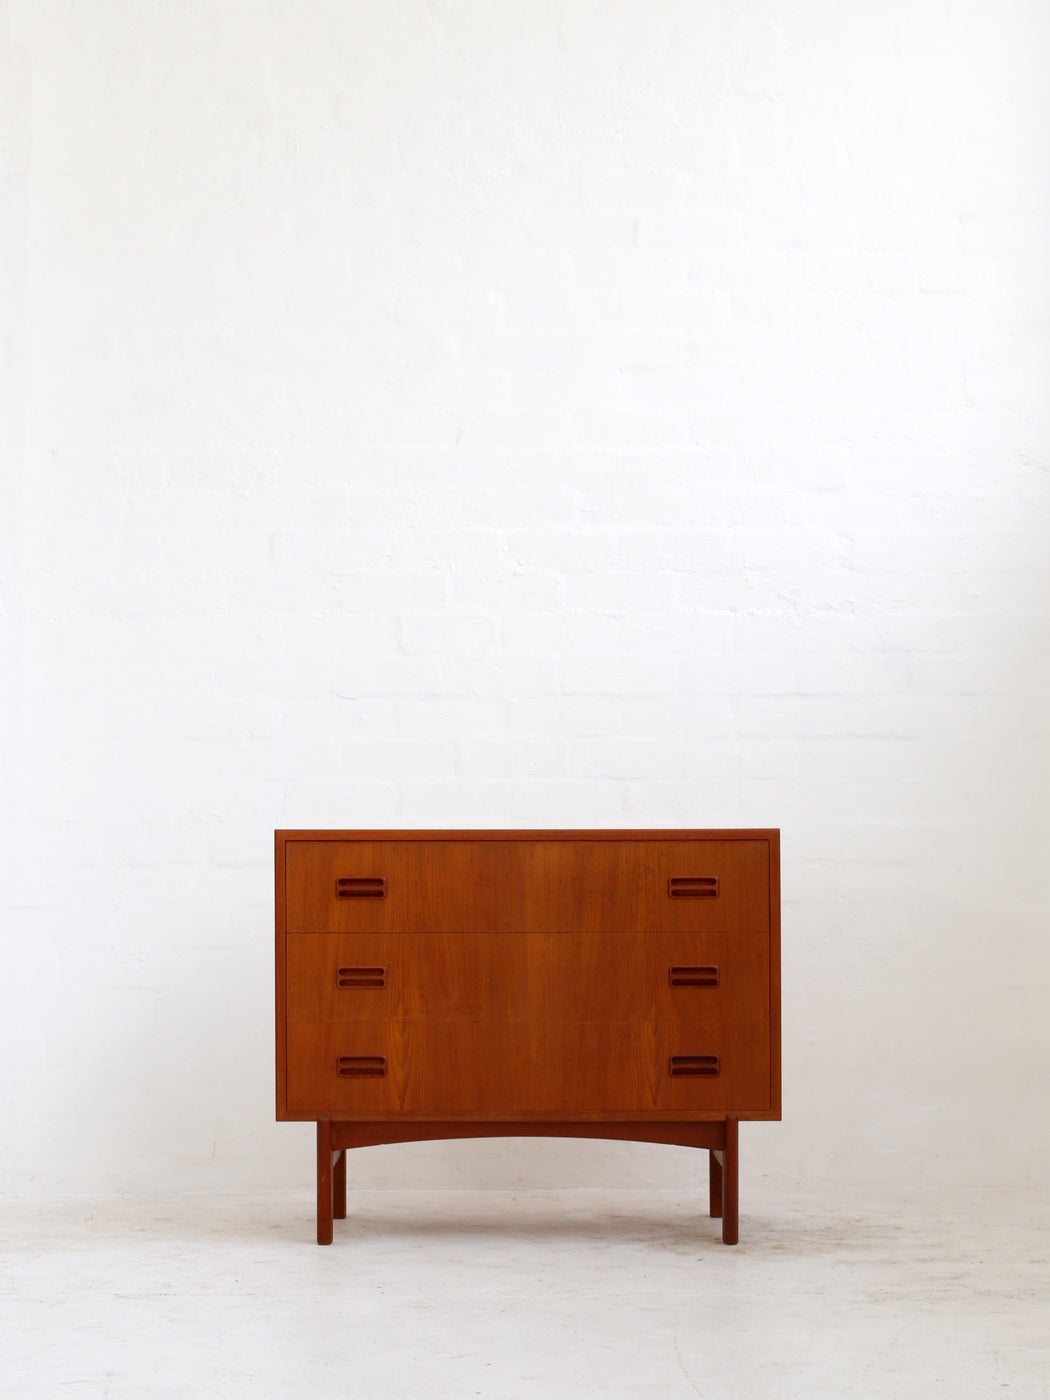 Danish Low Chest of Drawers